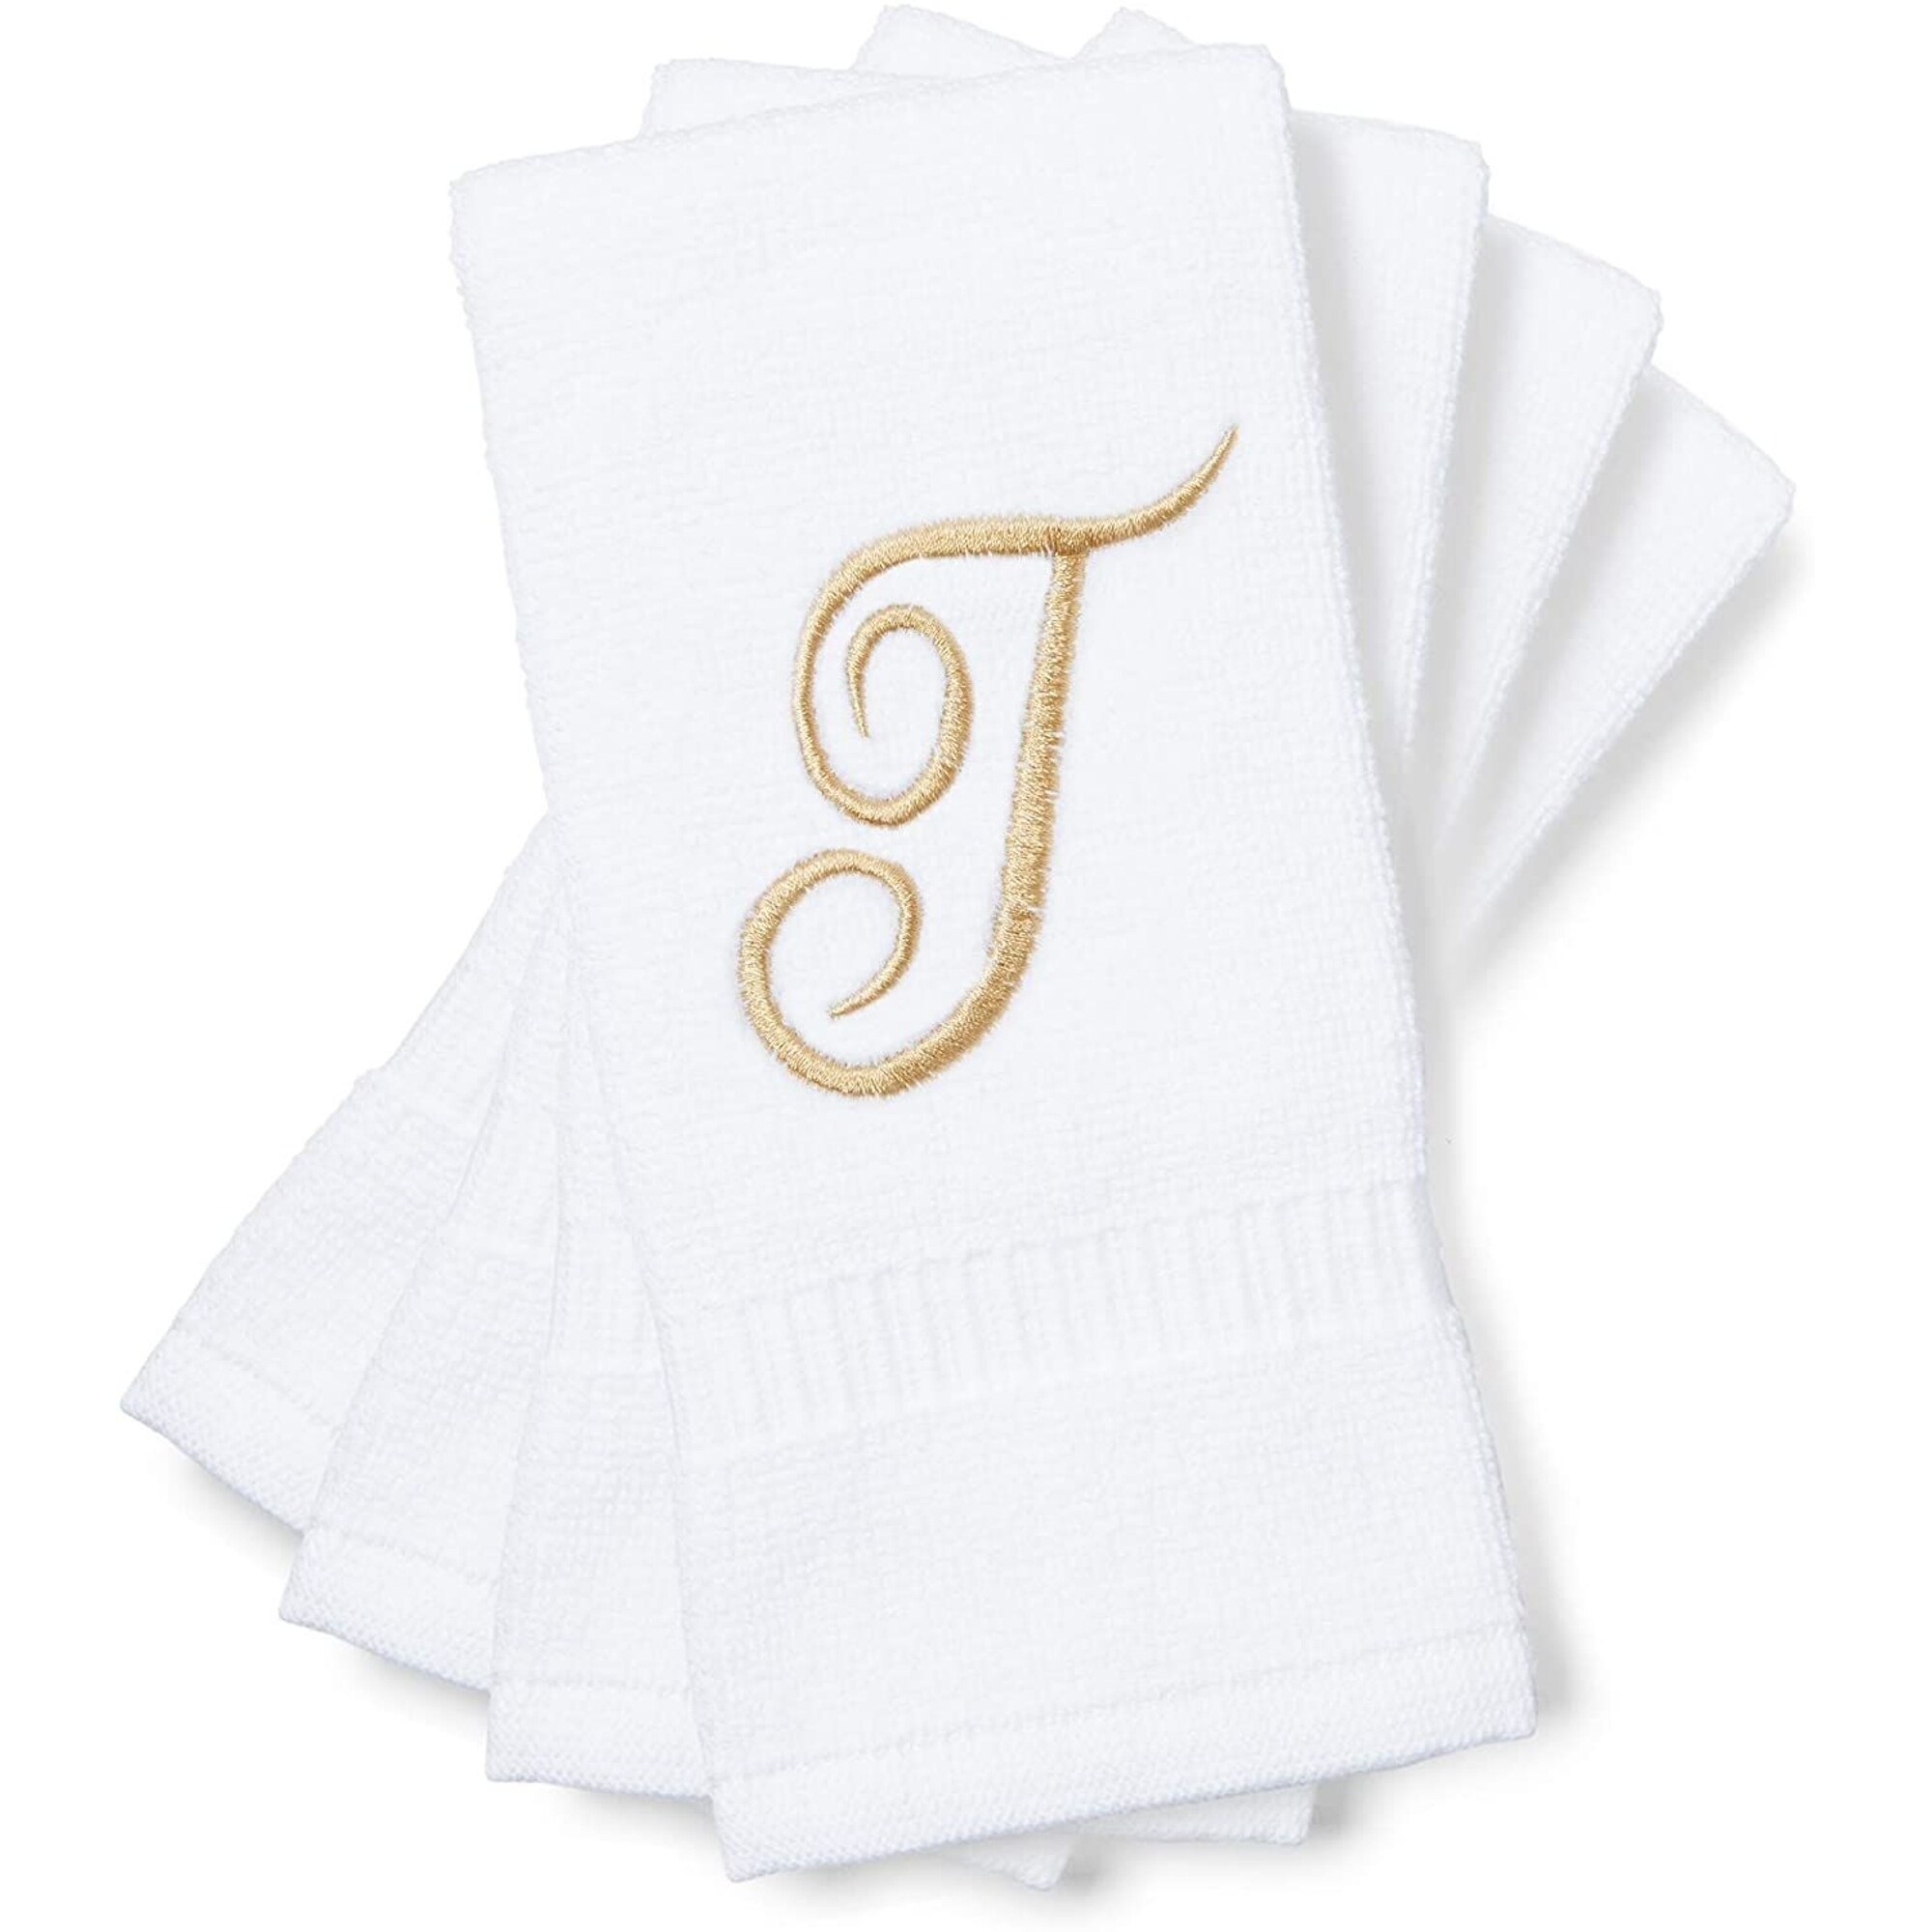 11 x 18 Inches Ivory Monogrammed Gifts Fingertip Towels Set of 4- Decorative Golden Brown Embroidered Towel Extra Absorbent 100% Cotton- Personalized Gift- for Bathroom/ Kitchen- Initial A 